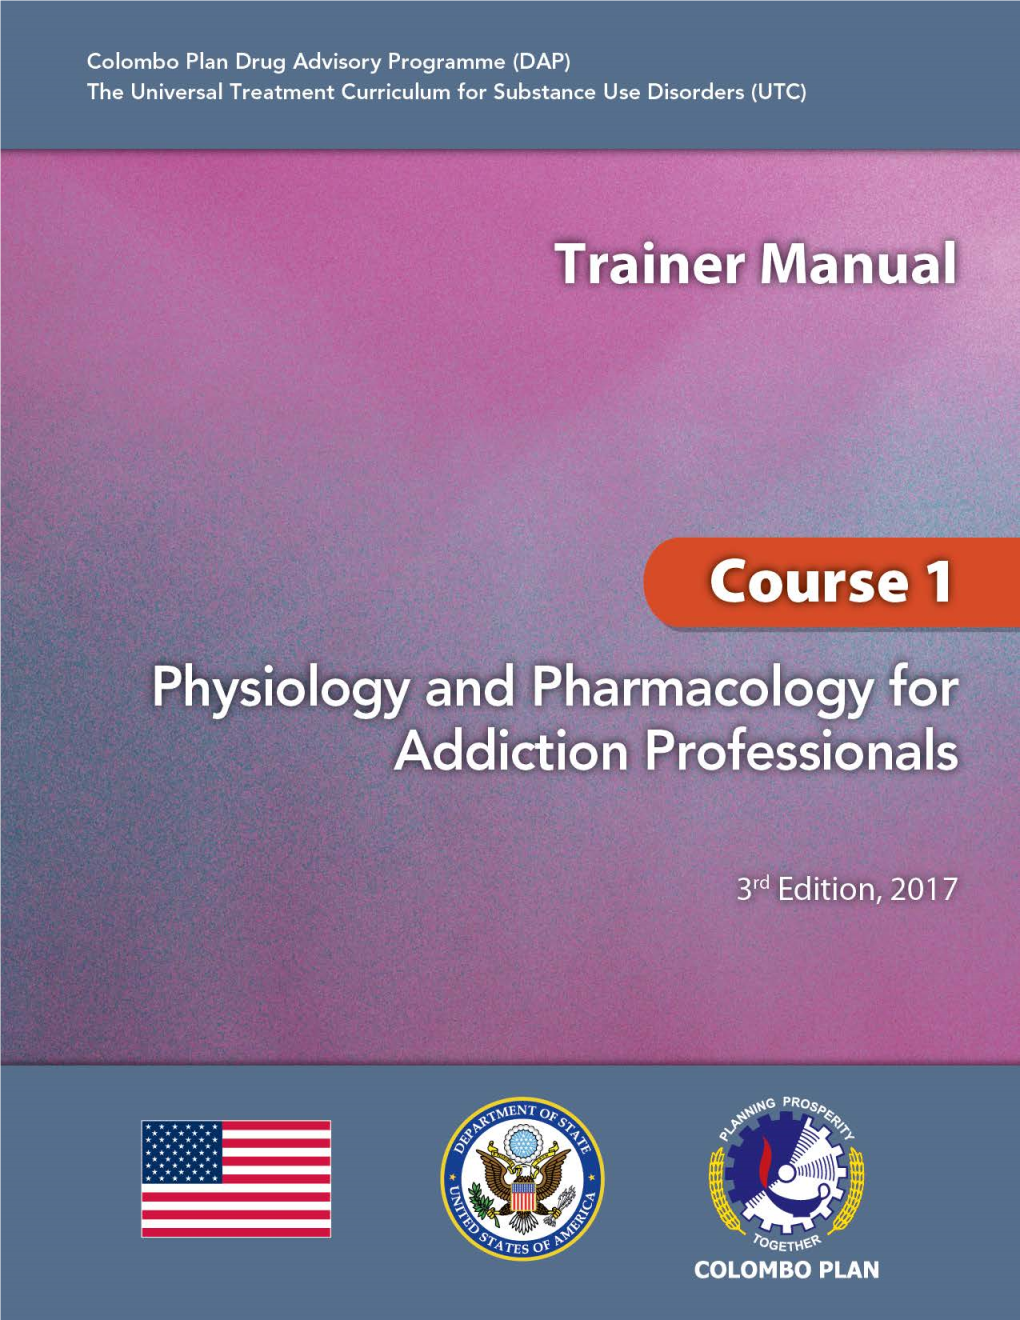 Physiology and Pharmacology for Addiction Professionals